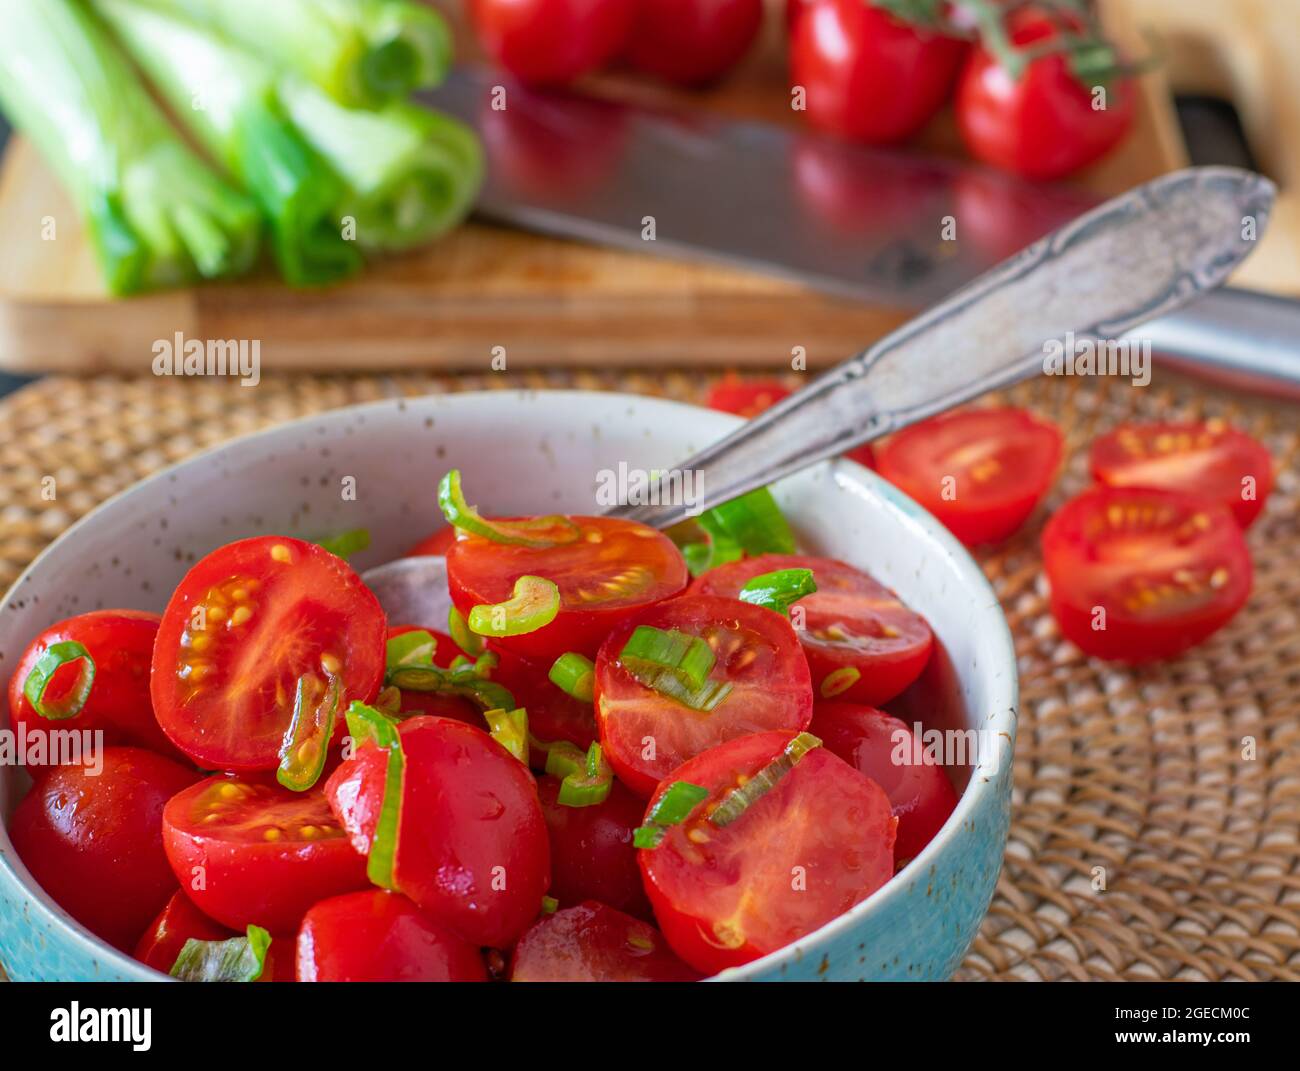 A bowl of fresh cherry tomatoes with olive oil and chives Stock Photo